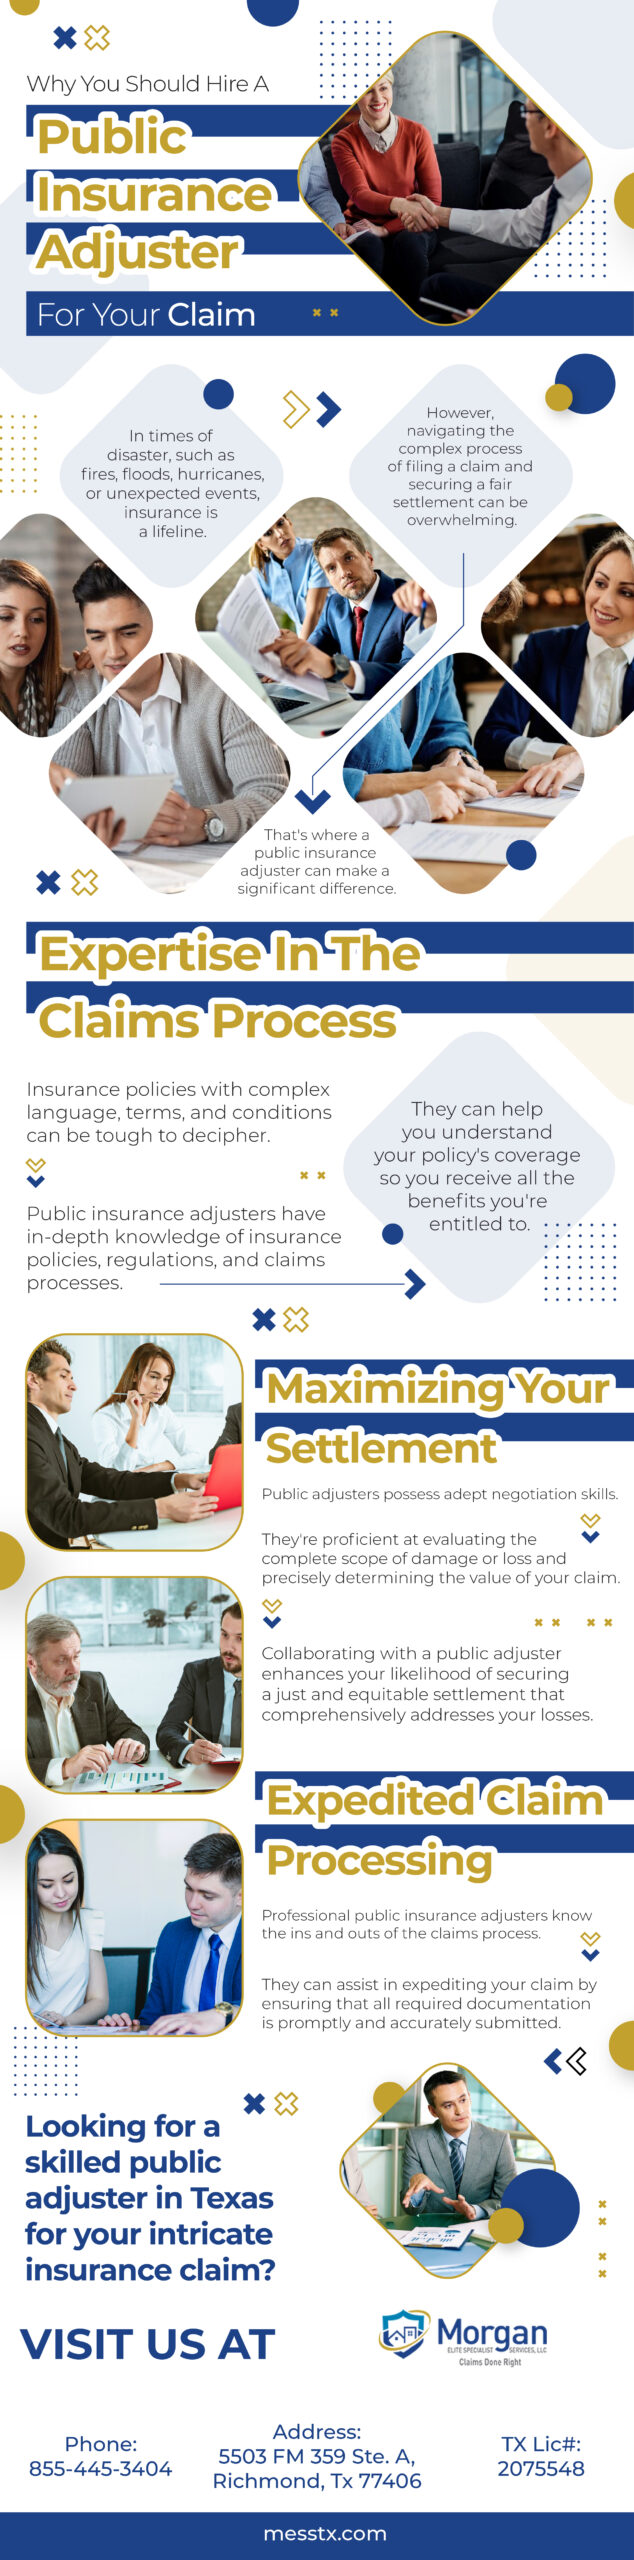 Why You Should Hire a Public Insurance Adjuster - Infograph